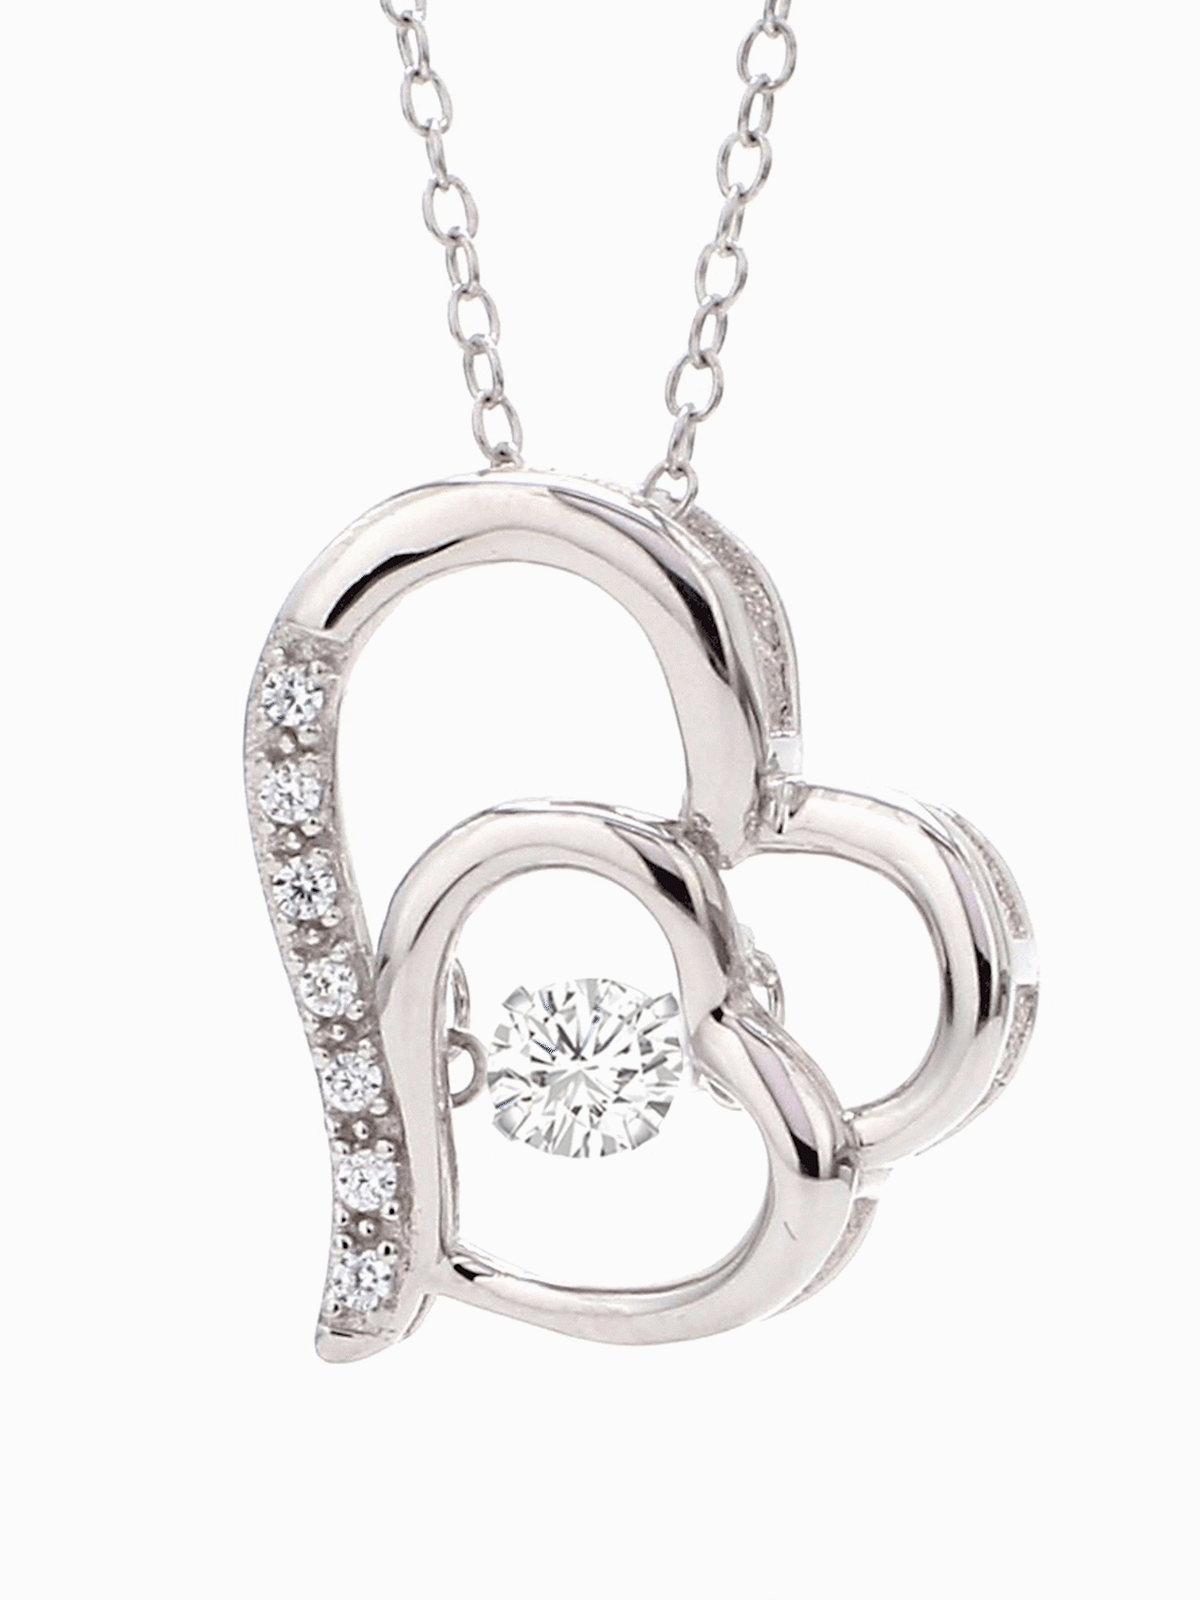 DANCING HEART PENDANT WITH CHAIN-4